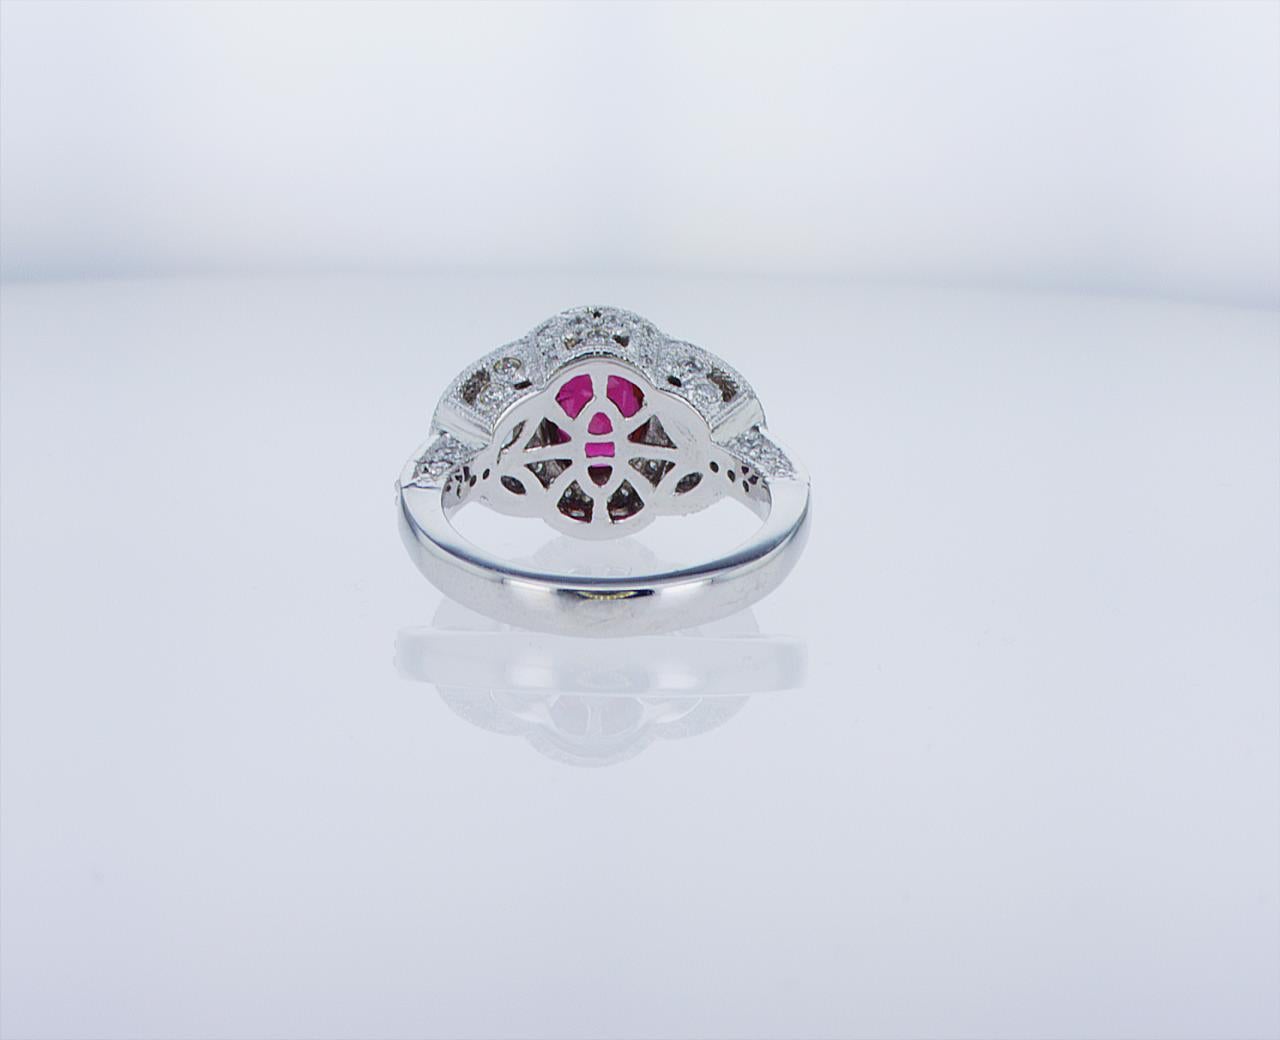 Oval Ruby Cocktail Ring with Half Moon Diamond Accents For Sale 5